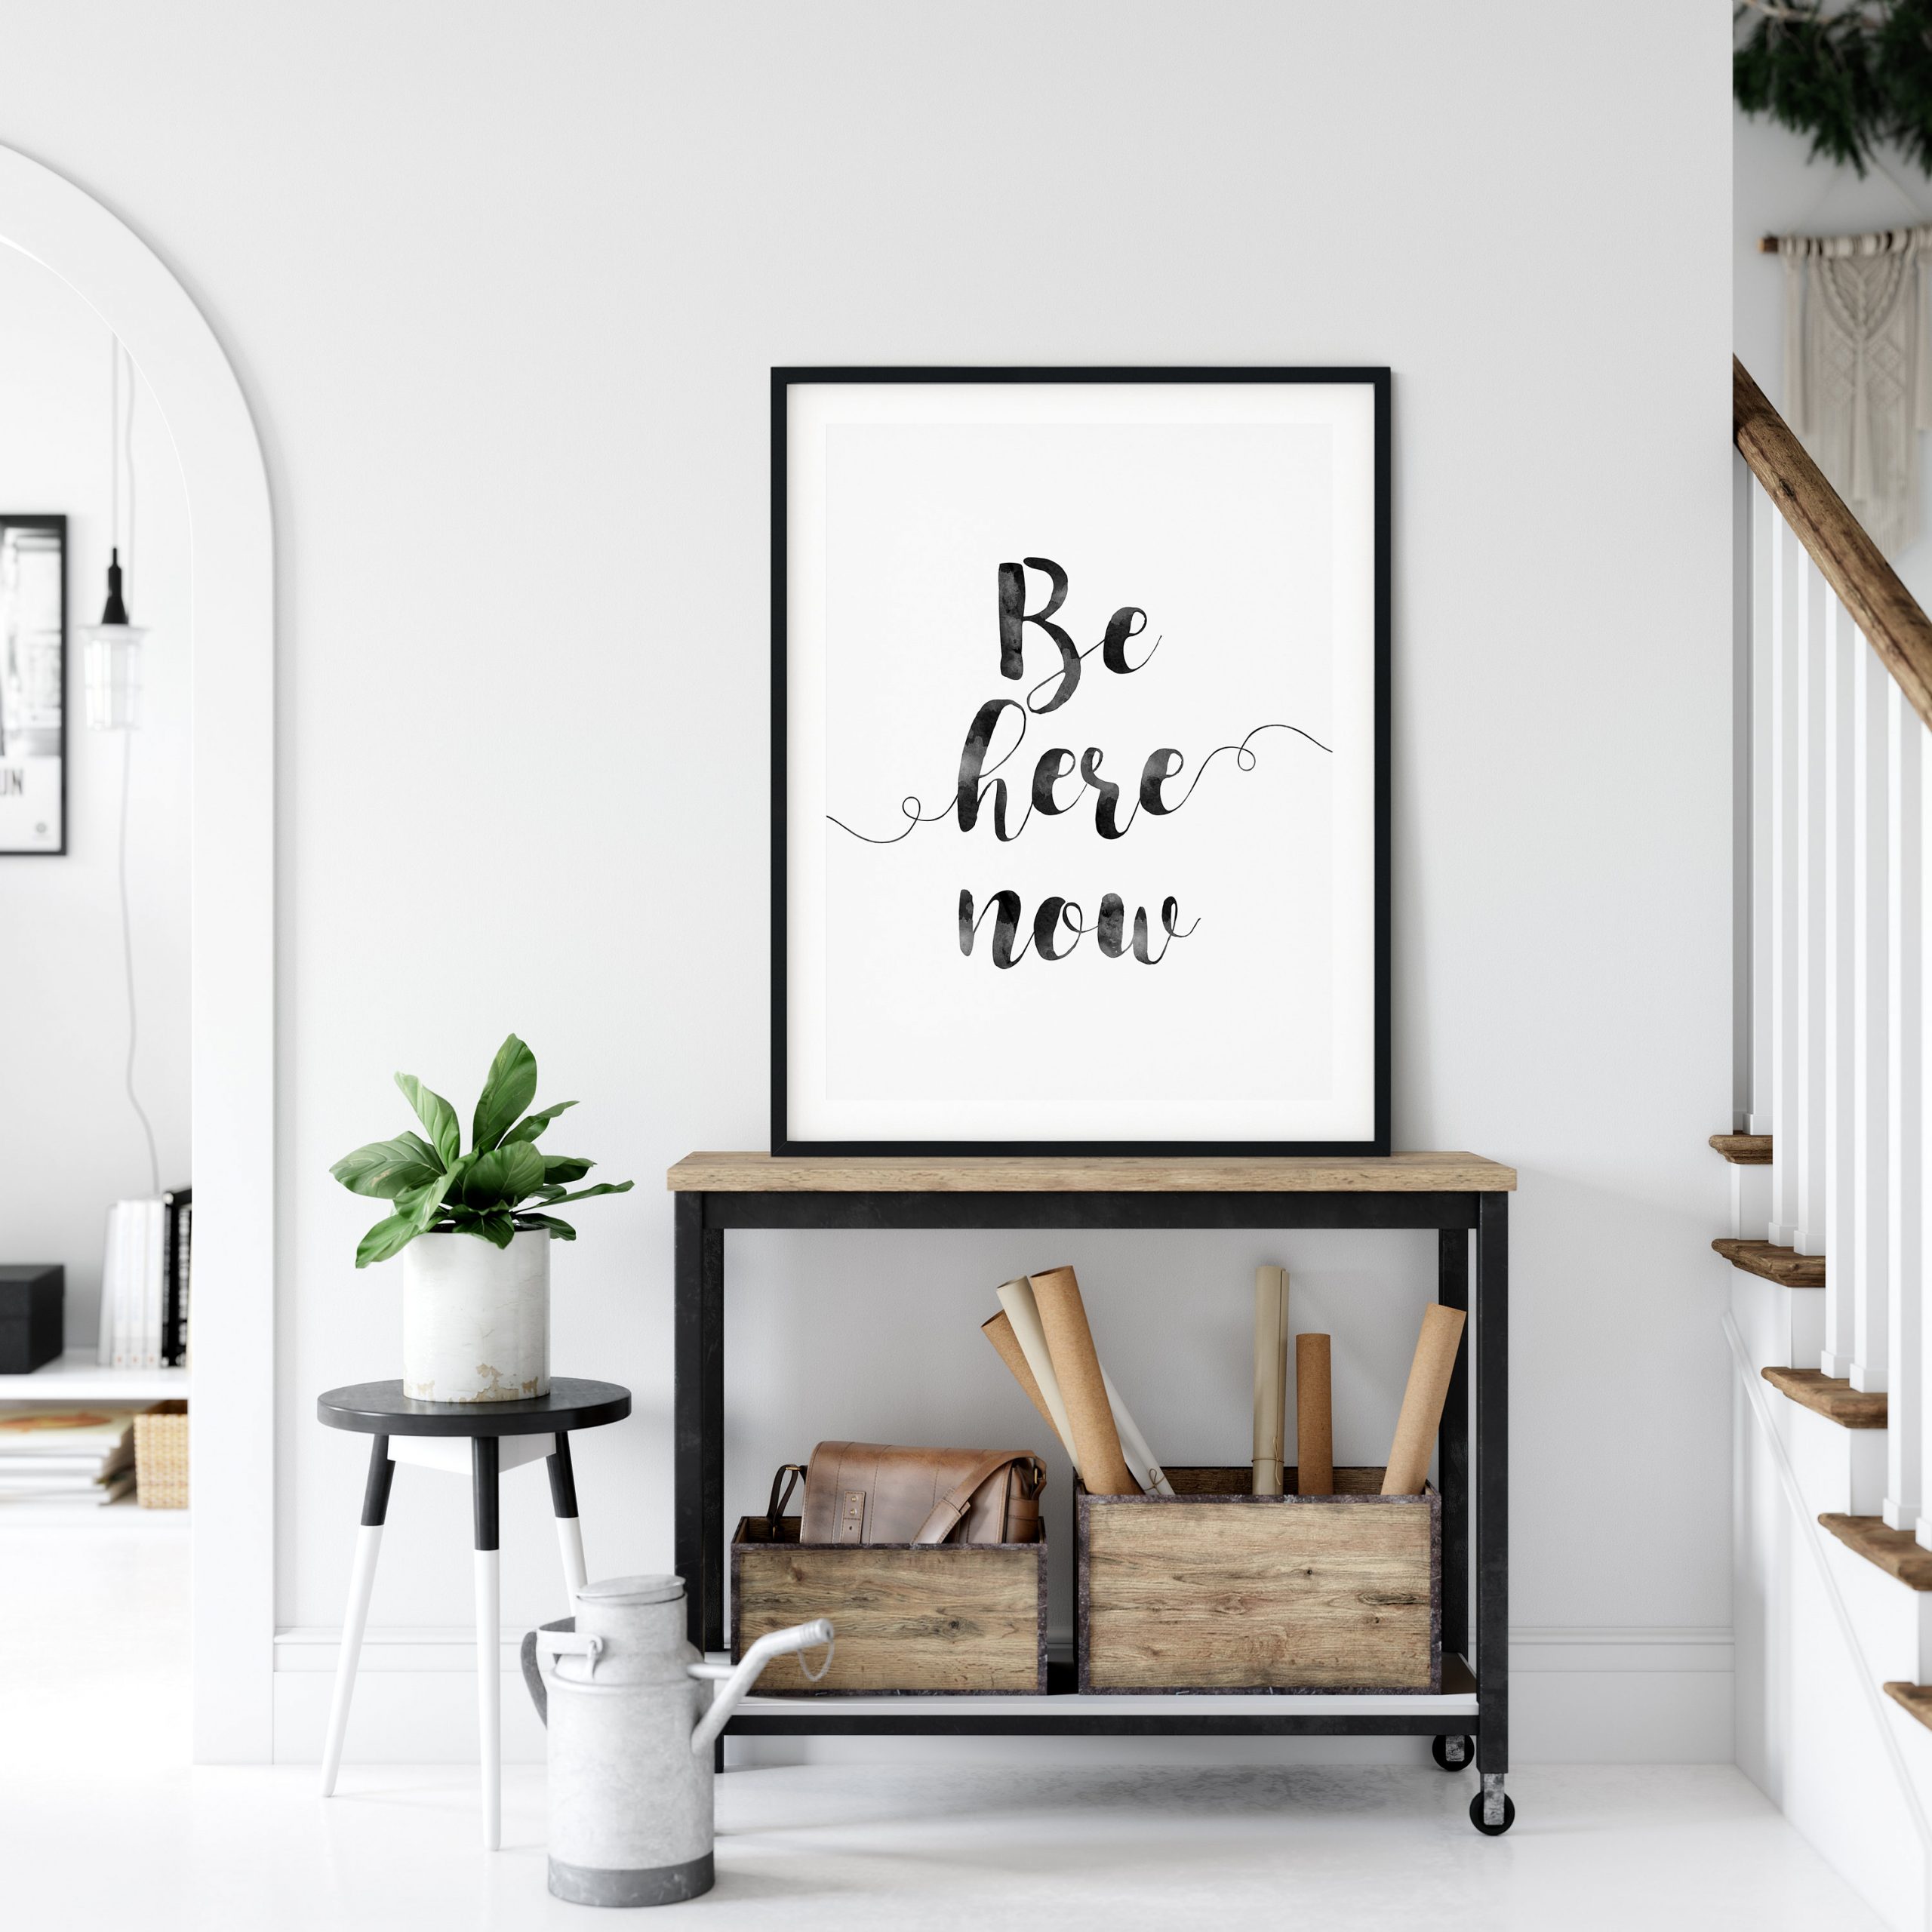 Motivational Poster Be Here Now, Inspirational Print, Room Wall Art Decor